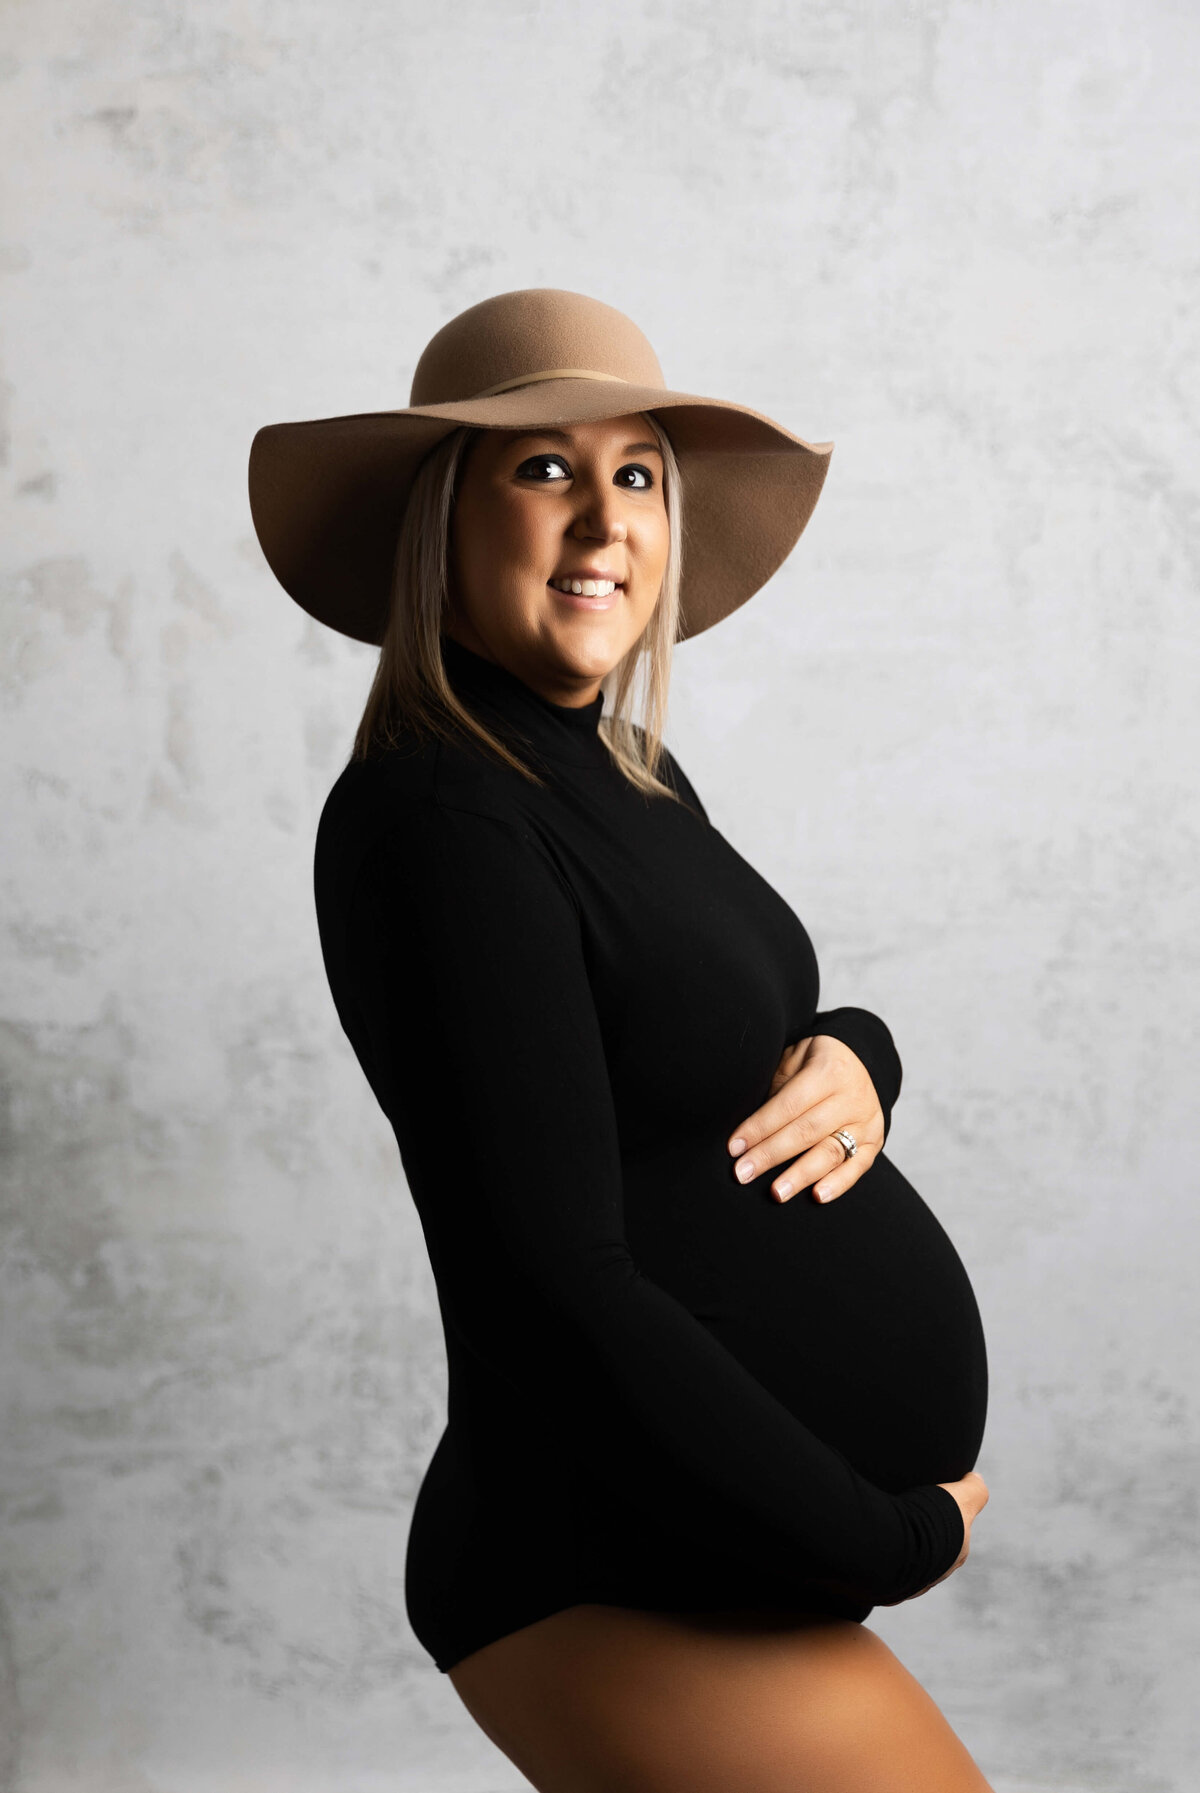 Photo of a pregnant mom posing for maternity portraits in an Erie PA studio